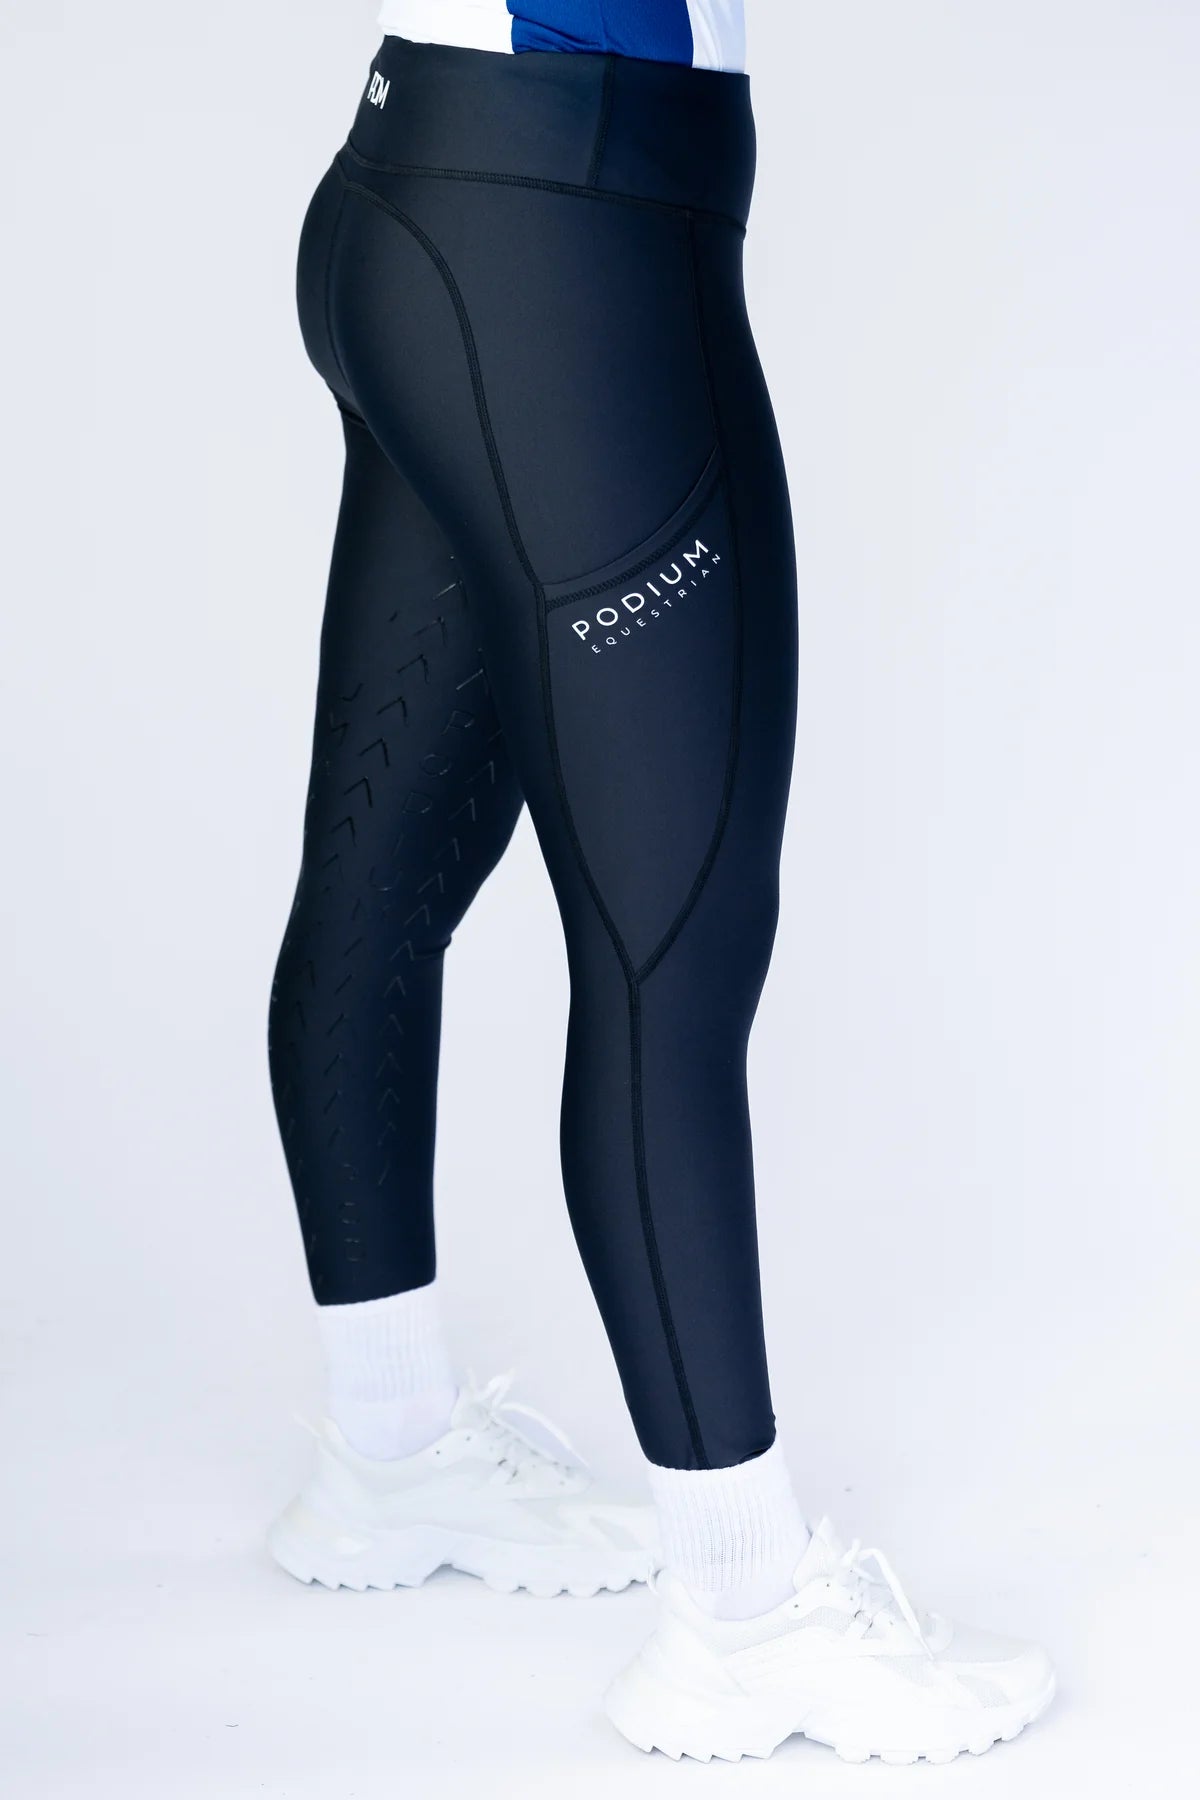 High Performance Horse Riding Tights with  Pocket - The Trading Stables